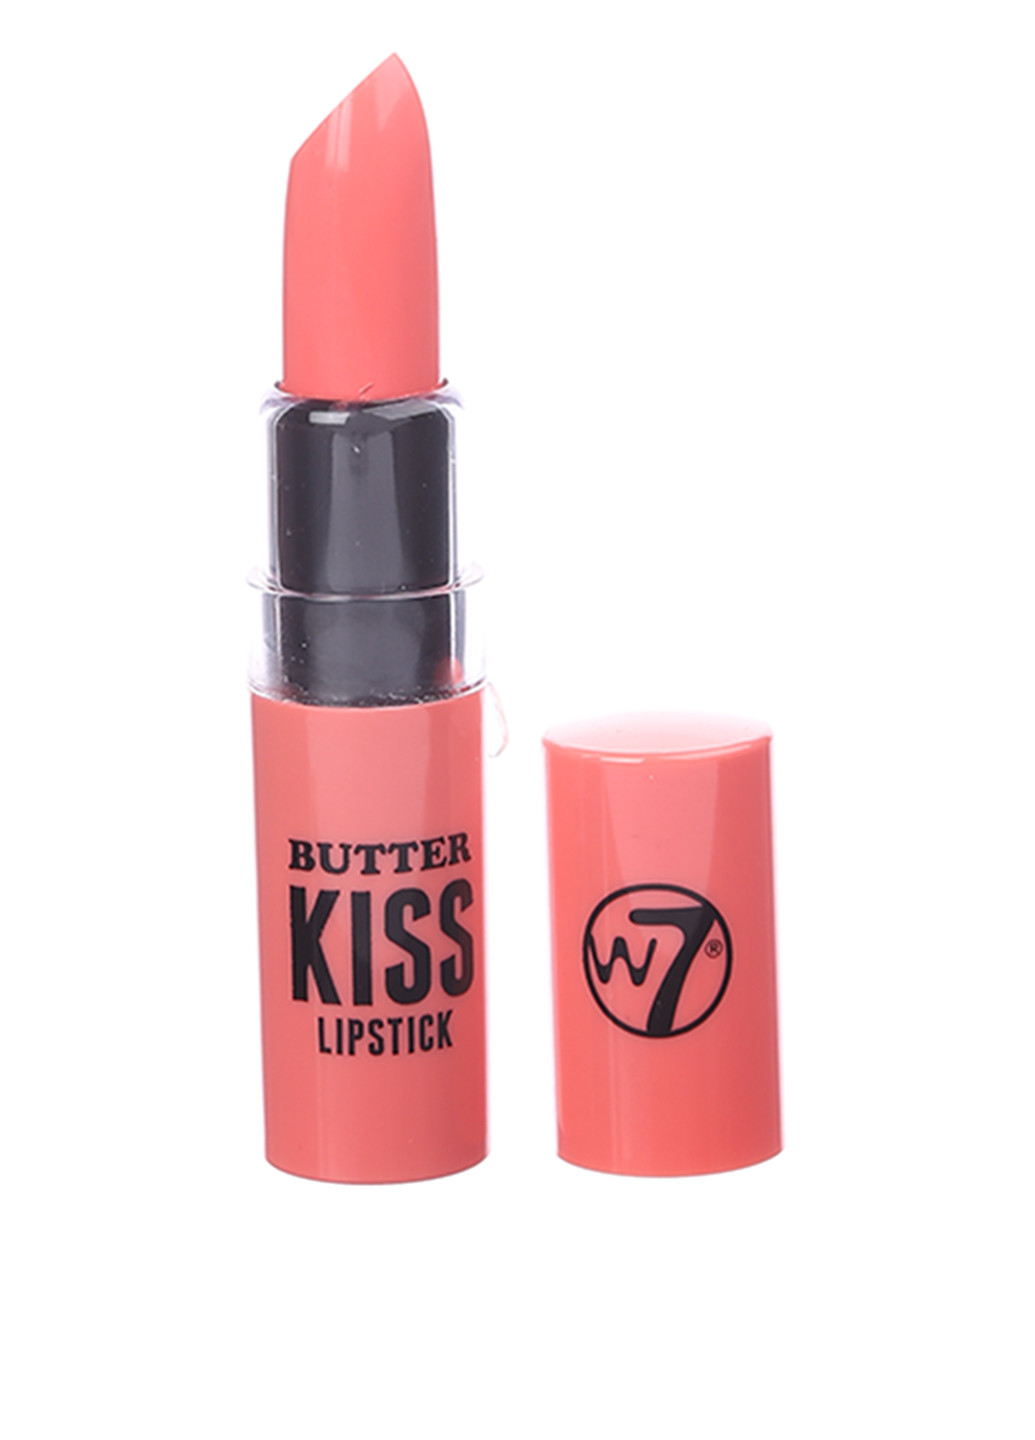 Помада Butter Kiss Lips Pink (candy coral), 3 г W7 (76805517)